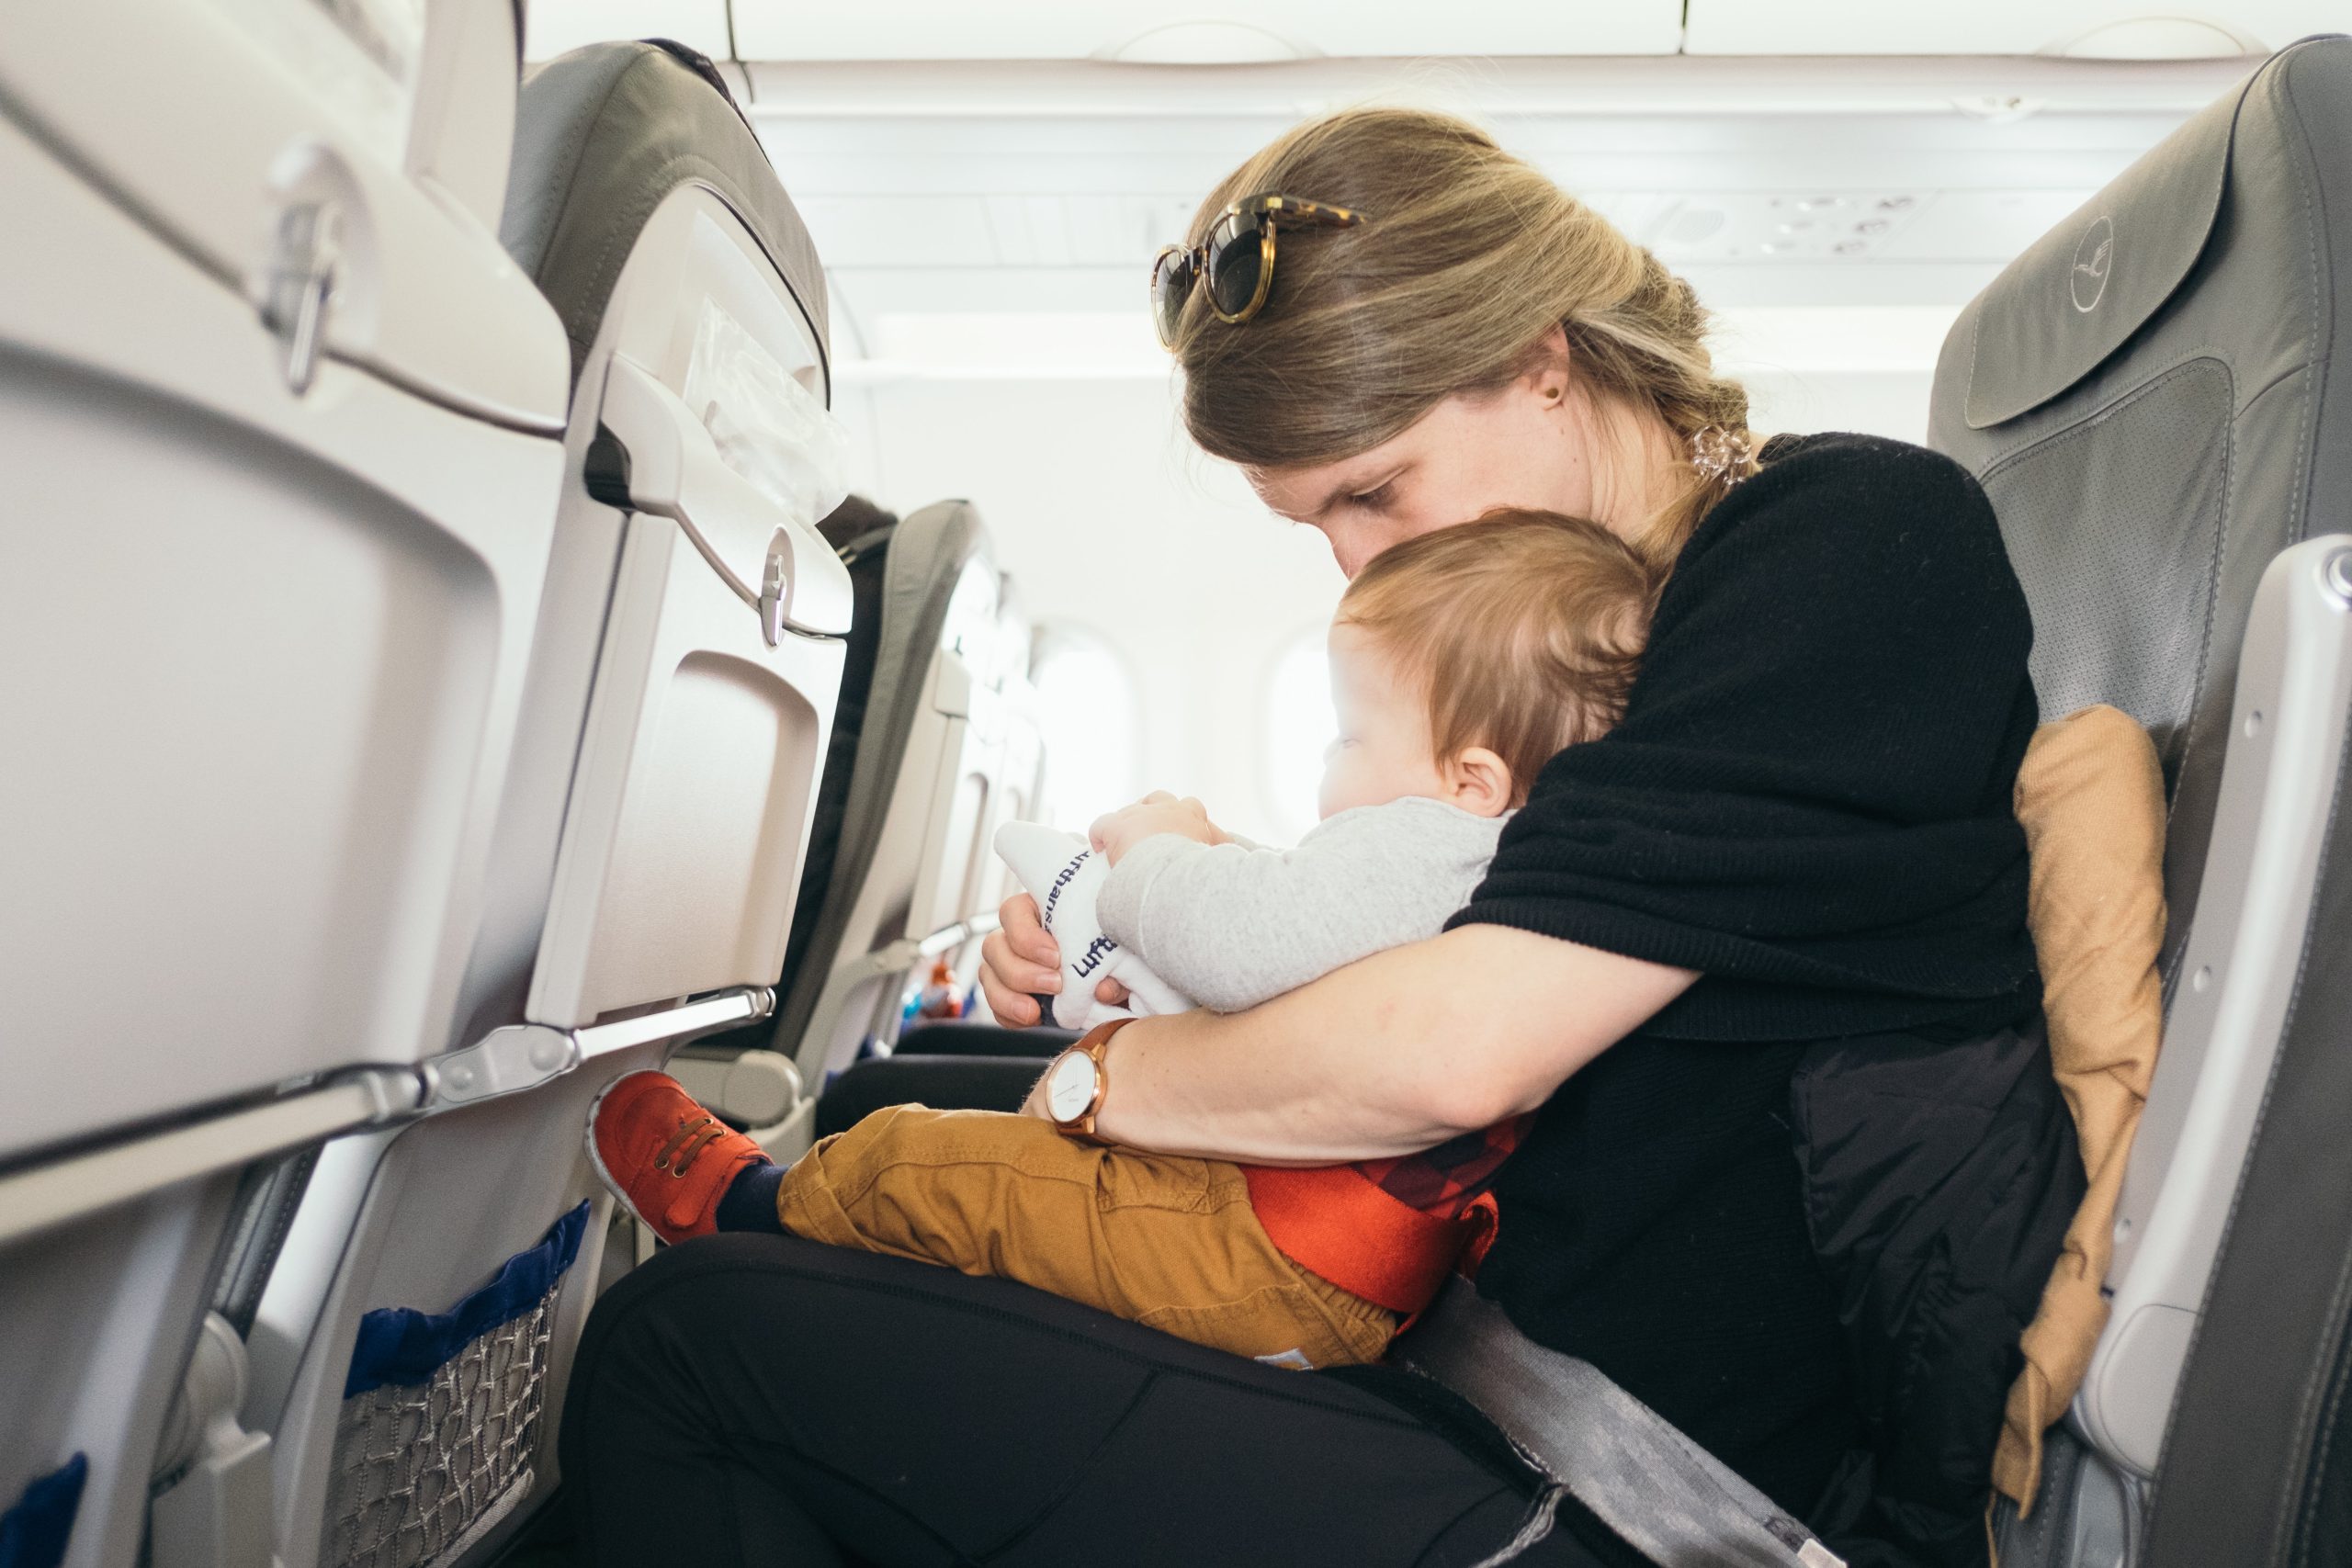 A woman with glasses on her head sits in an airplane seat, holding a baby on her lap. The baby is focused on something in their hands. Both are fastened with a seatbelt. The airplane's interior and rows of seats are visible.